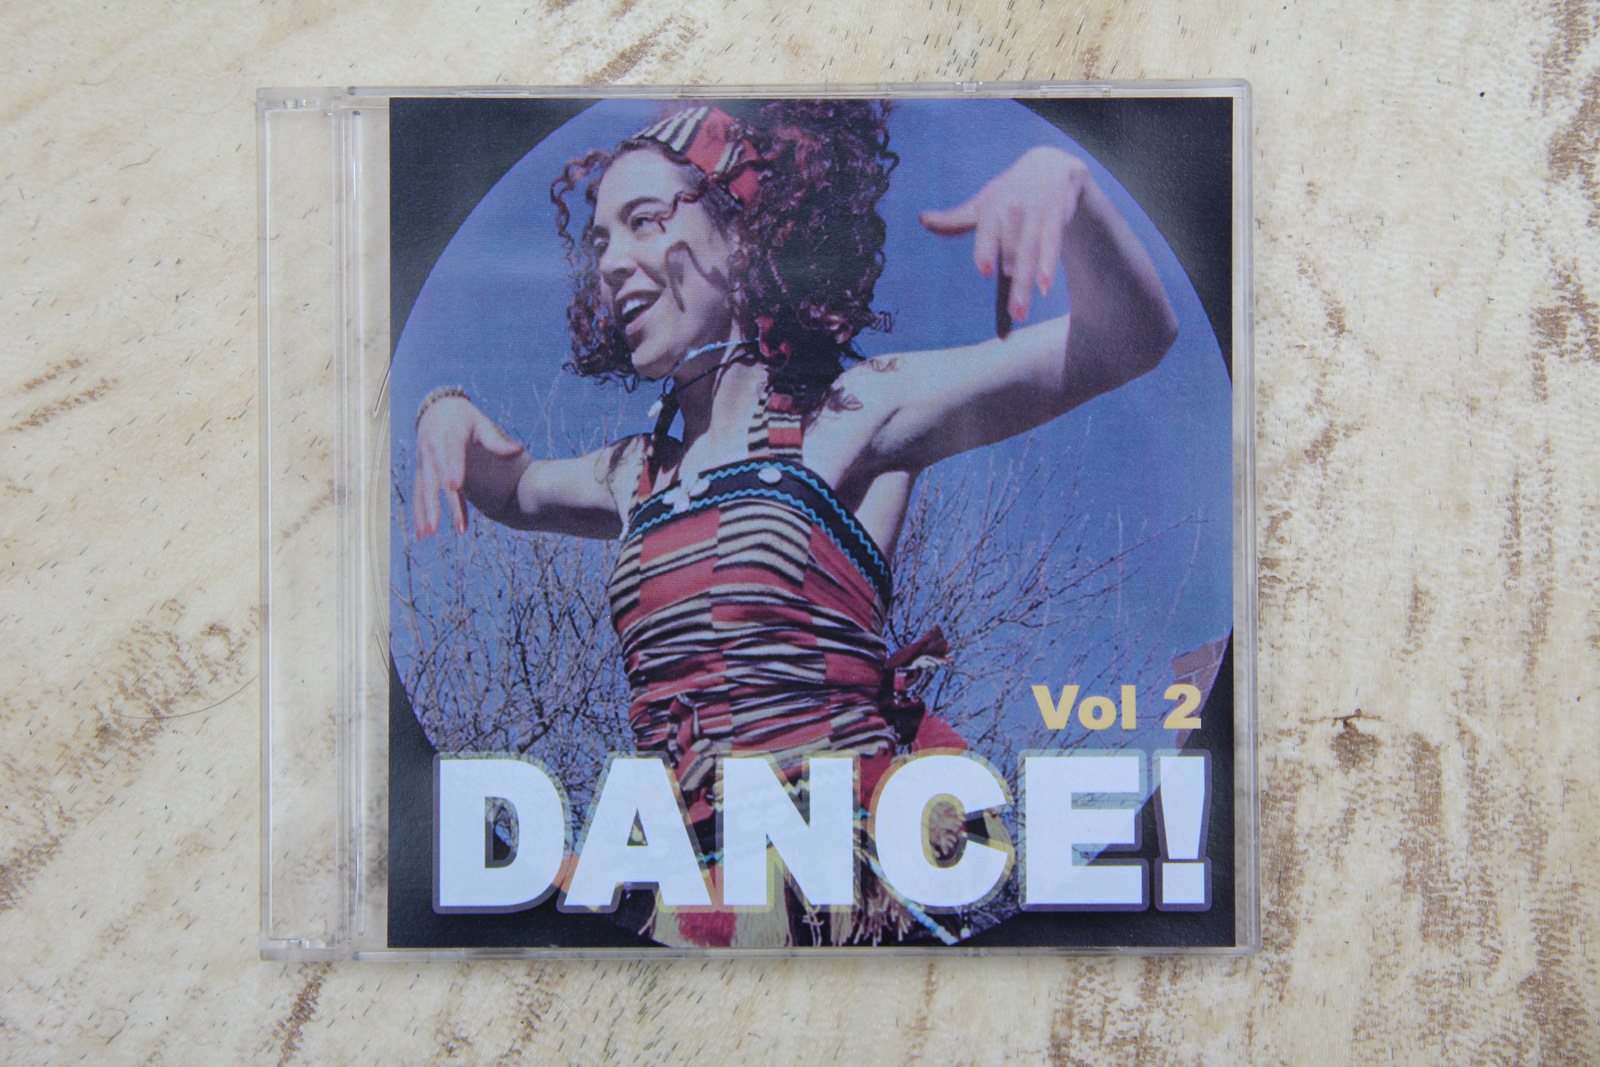 p[icture of CD case with dancer